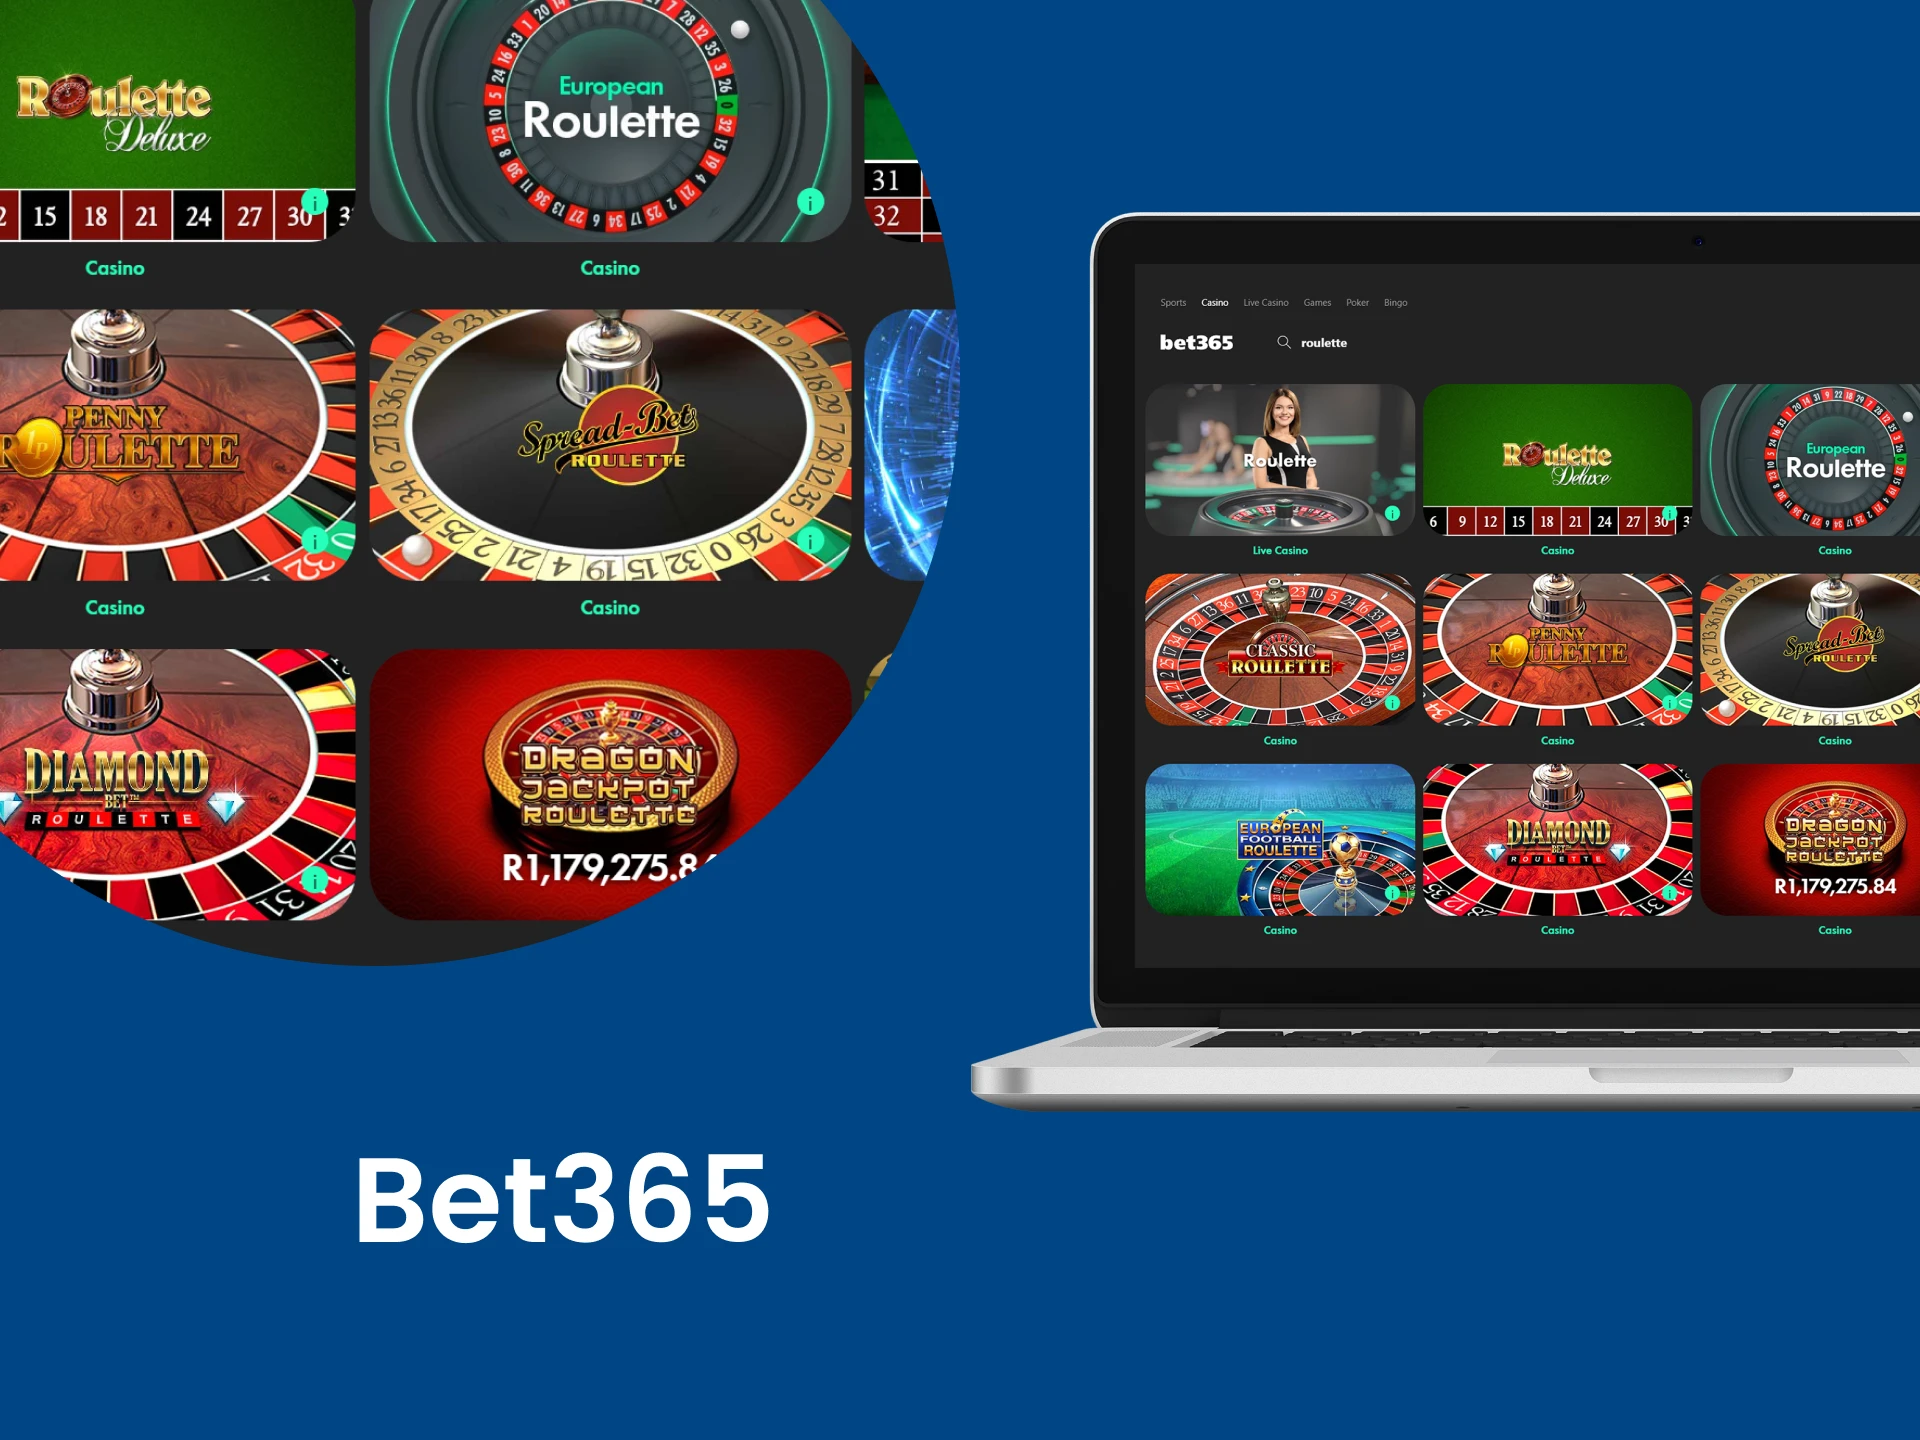 Choose a quality roulette service such as Bet365.